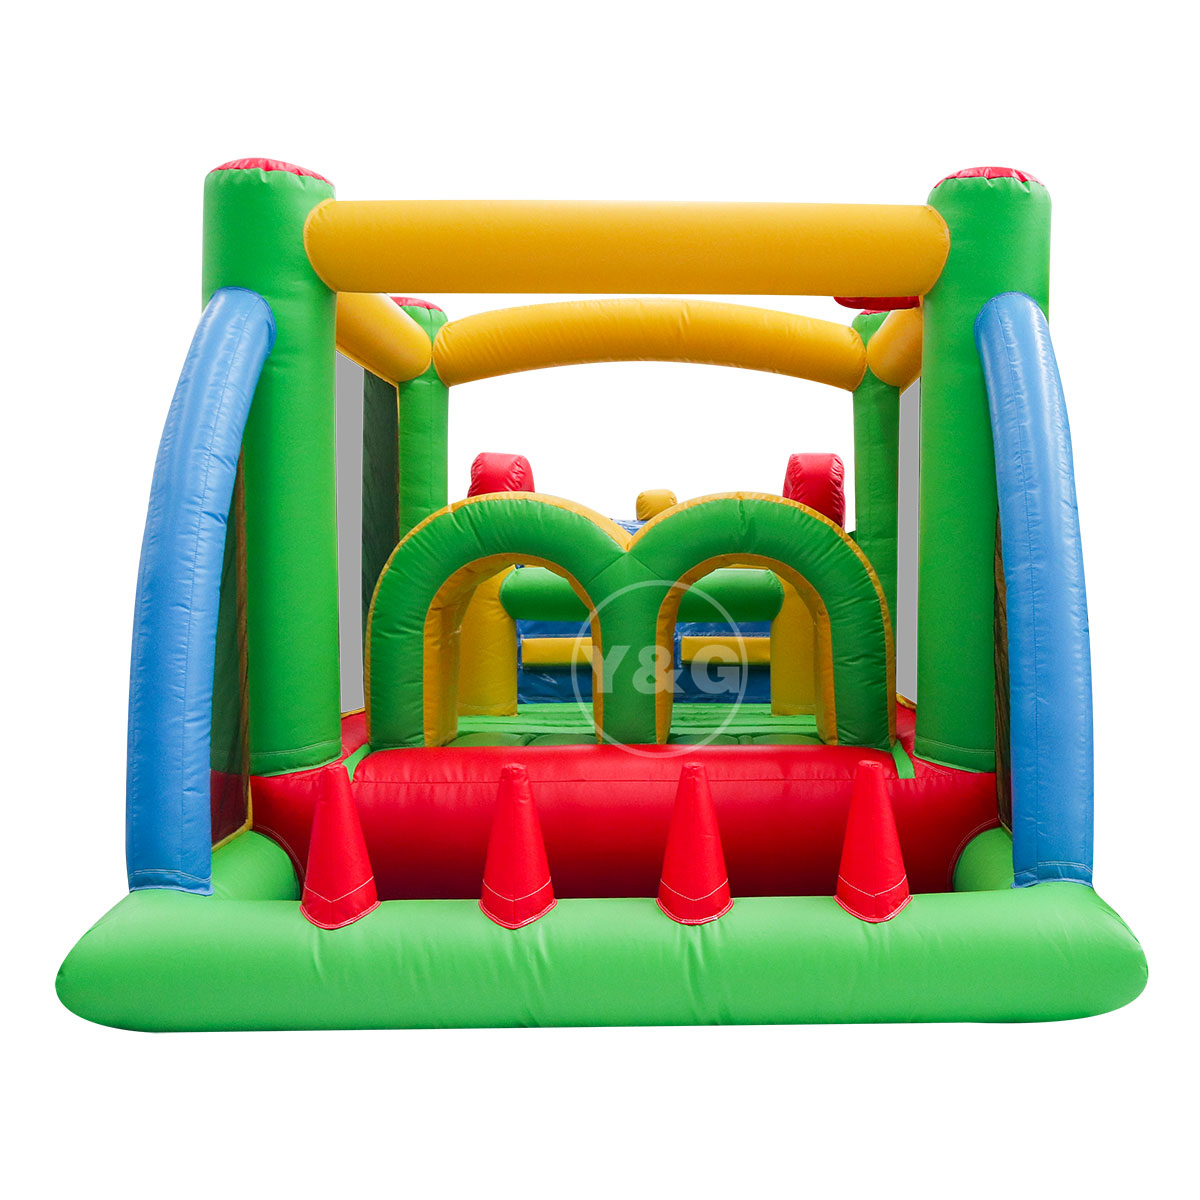 Inflatable obstacle course for kidsYGO68